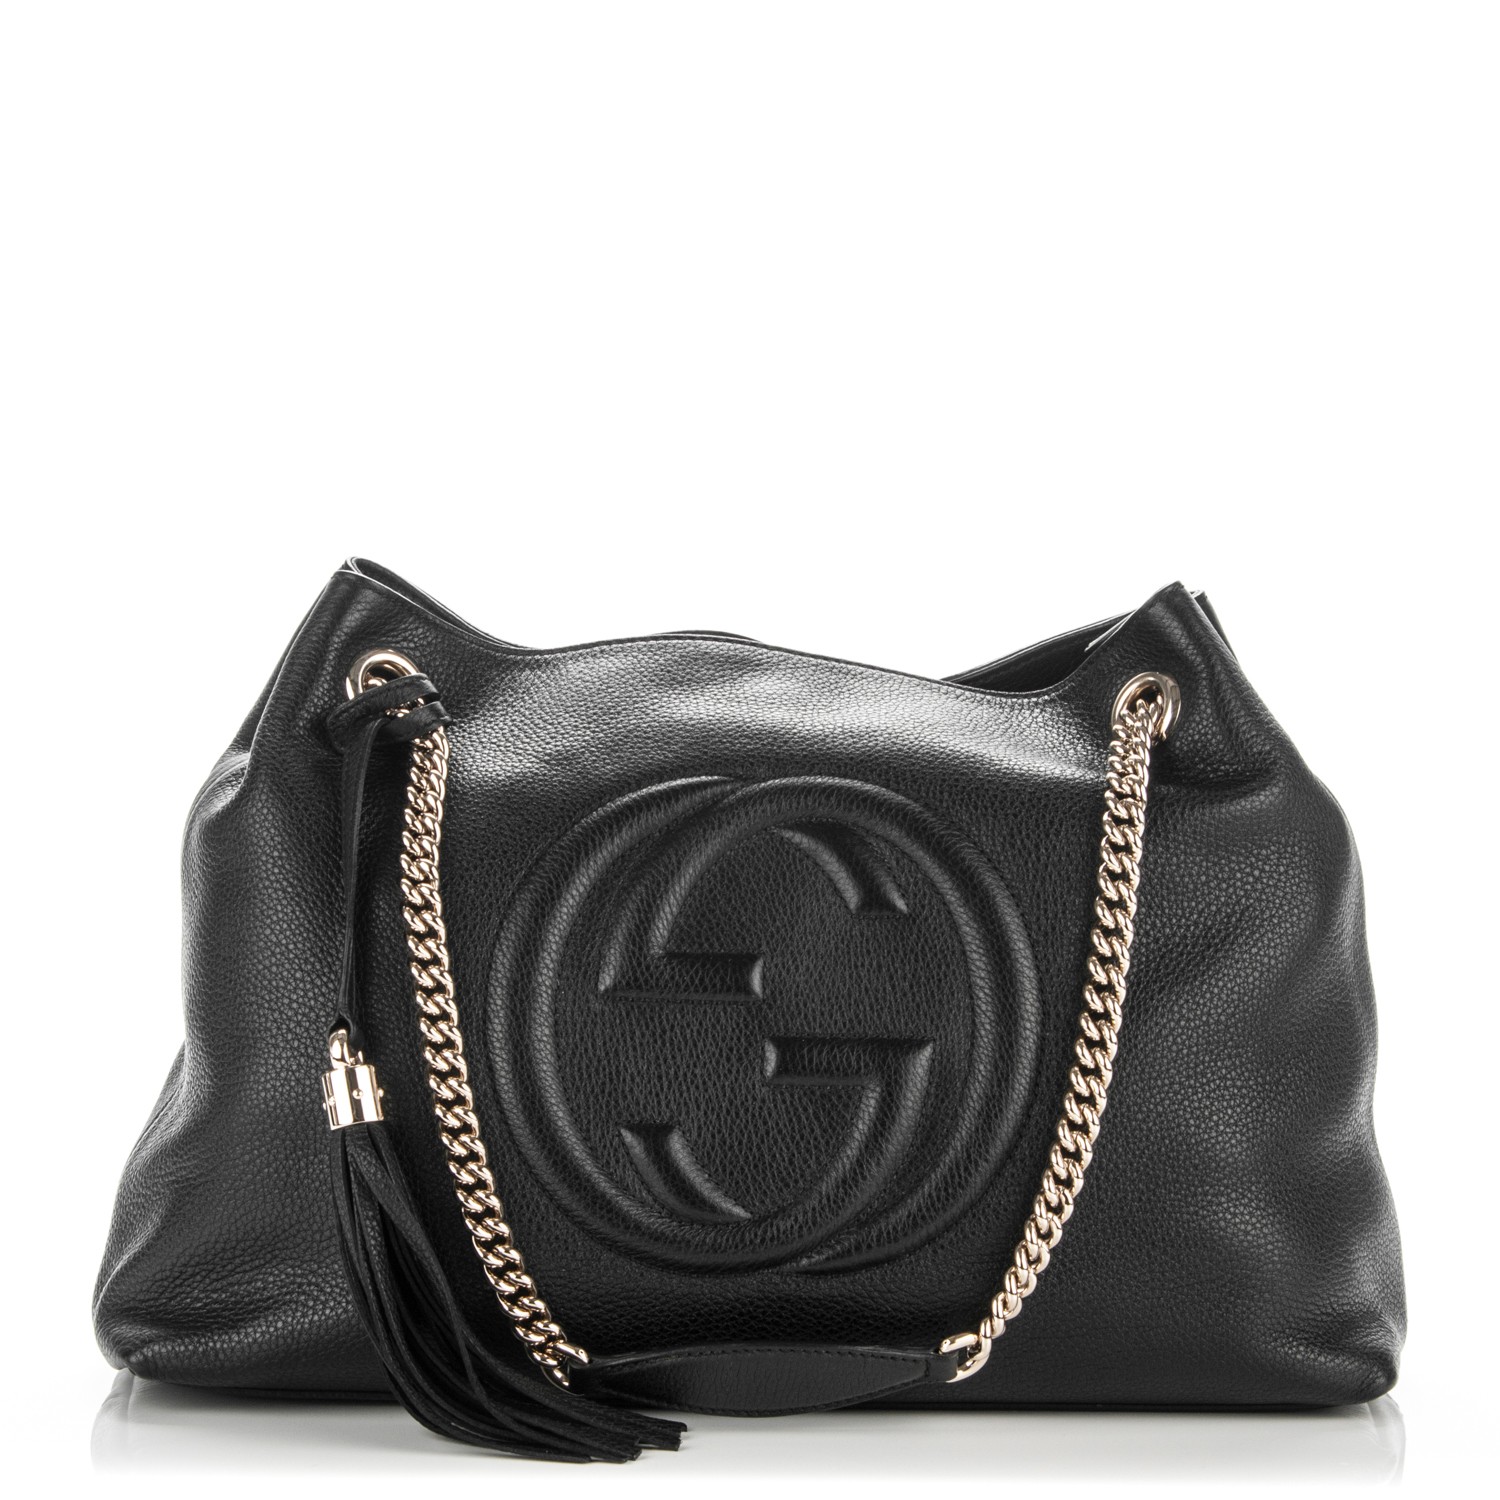 gucci black bag with chain